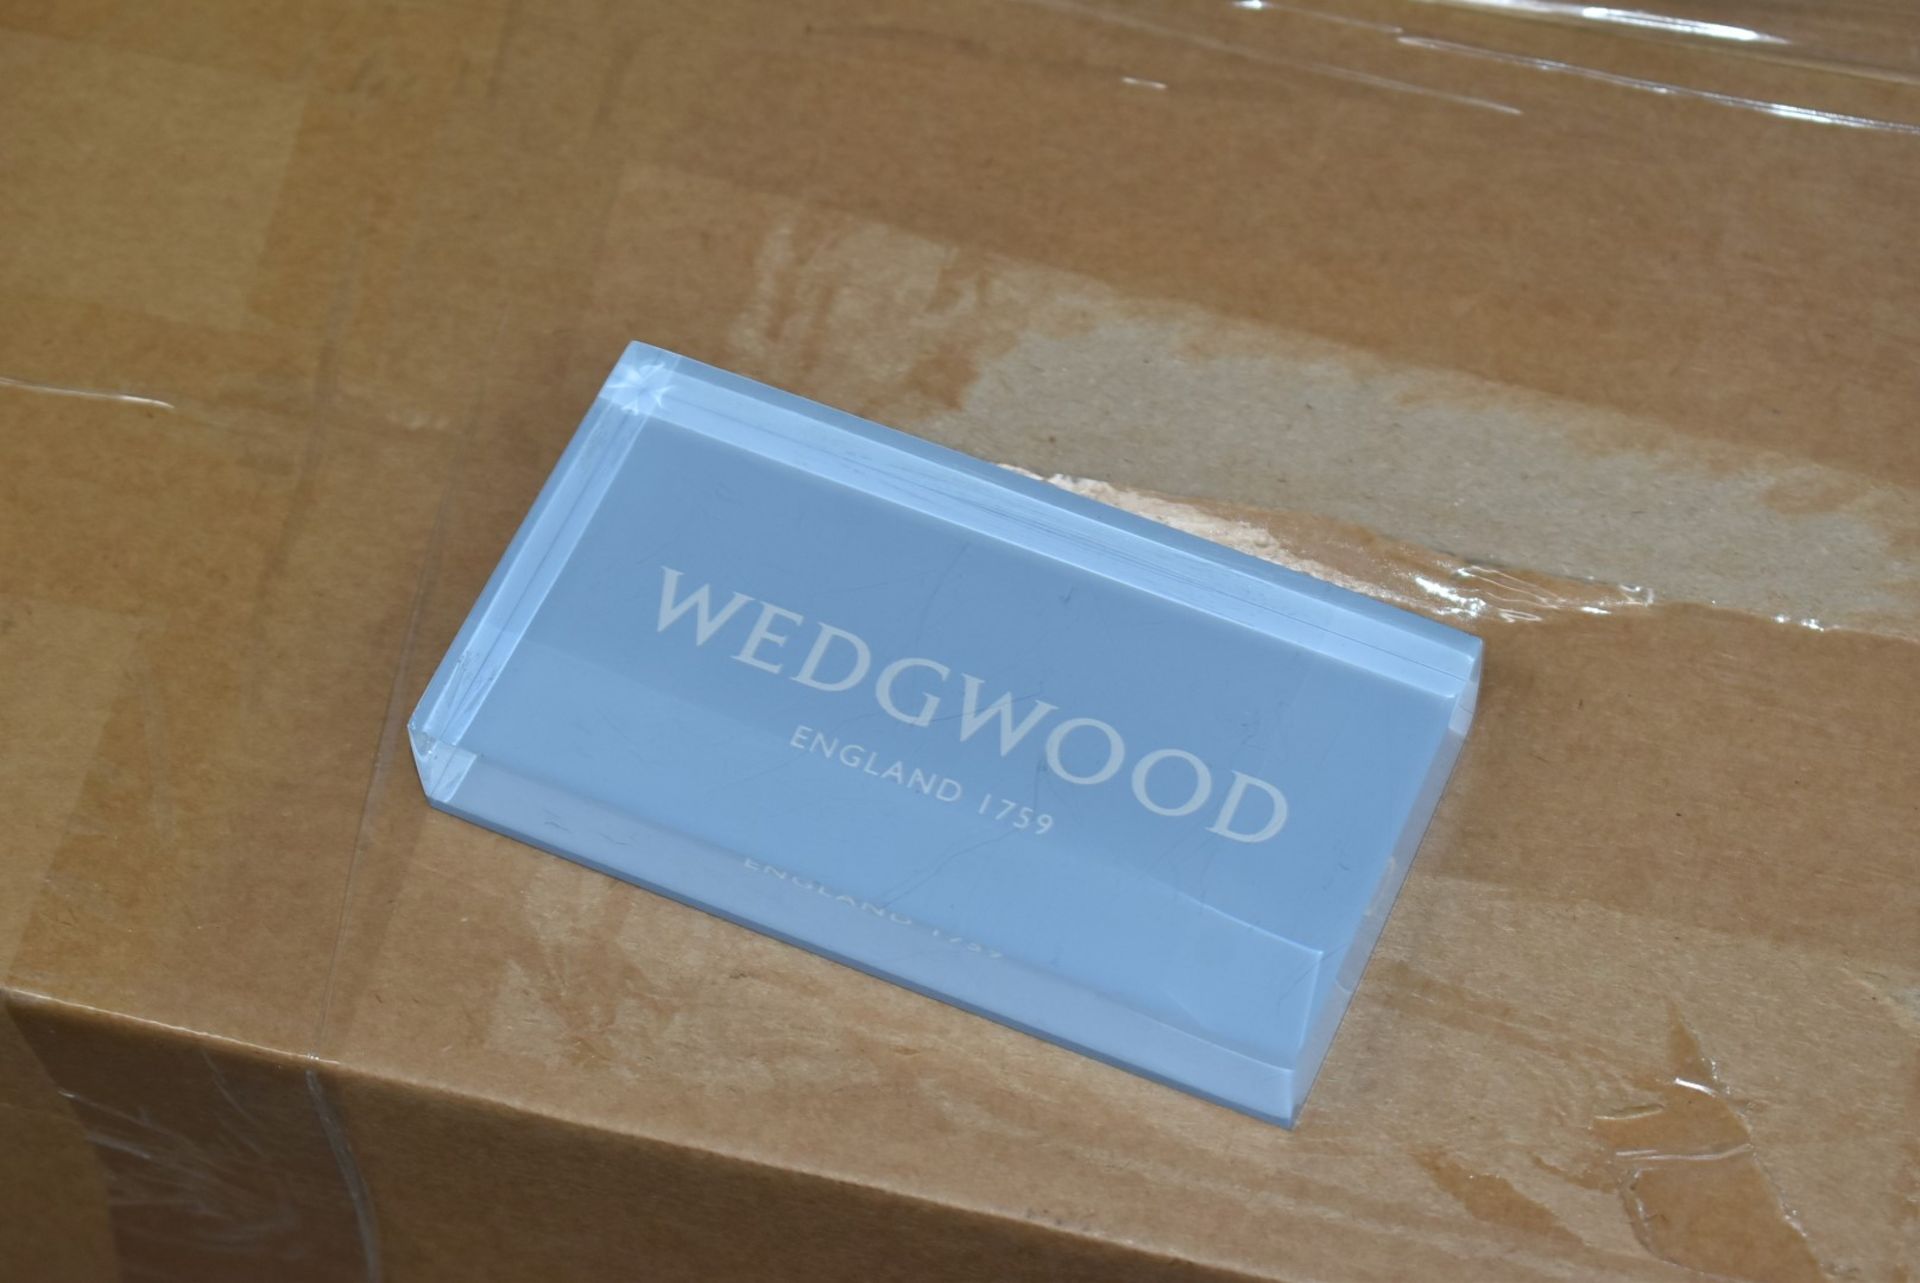 1 x Wedgewood Retail Pack - Includes 3 x Various Sized Decoration Hanger Stands, Advertisement - Image 5 of 7